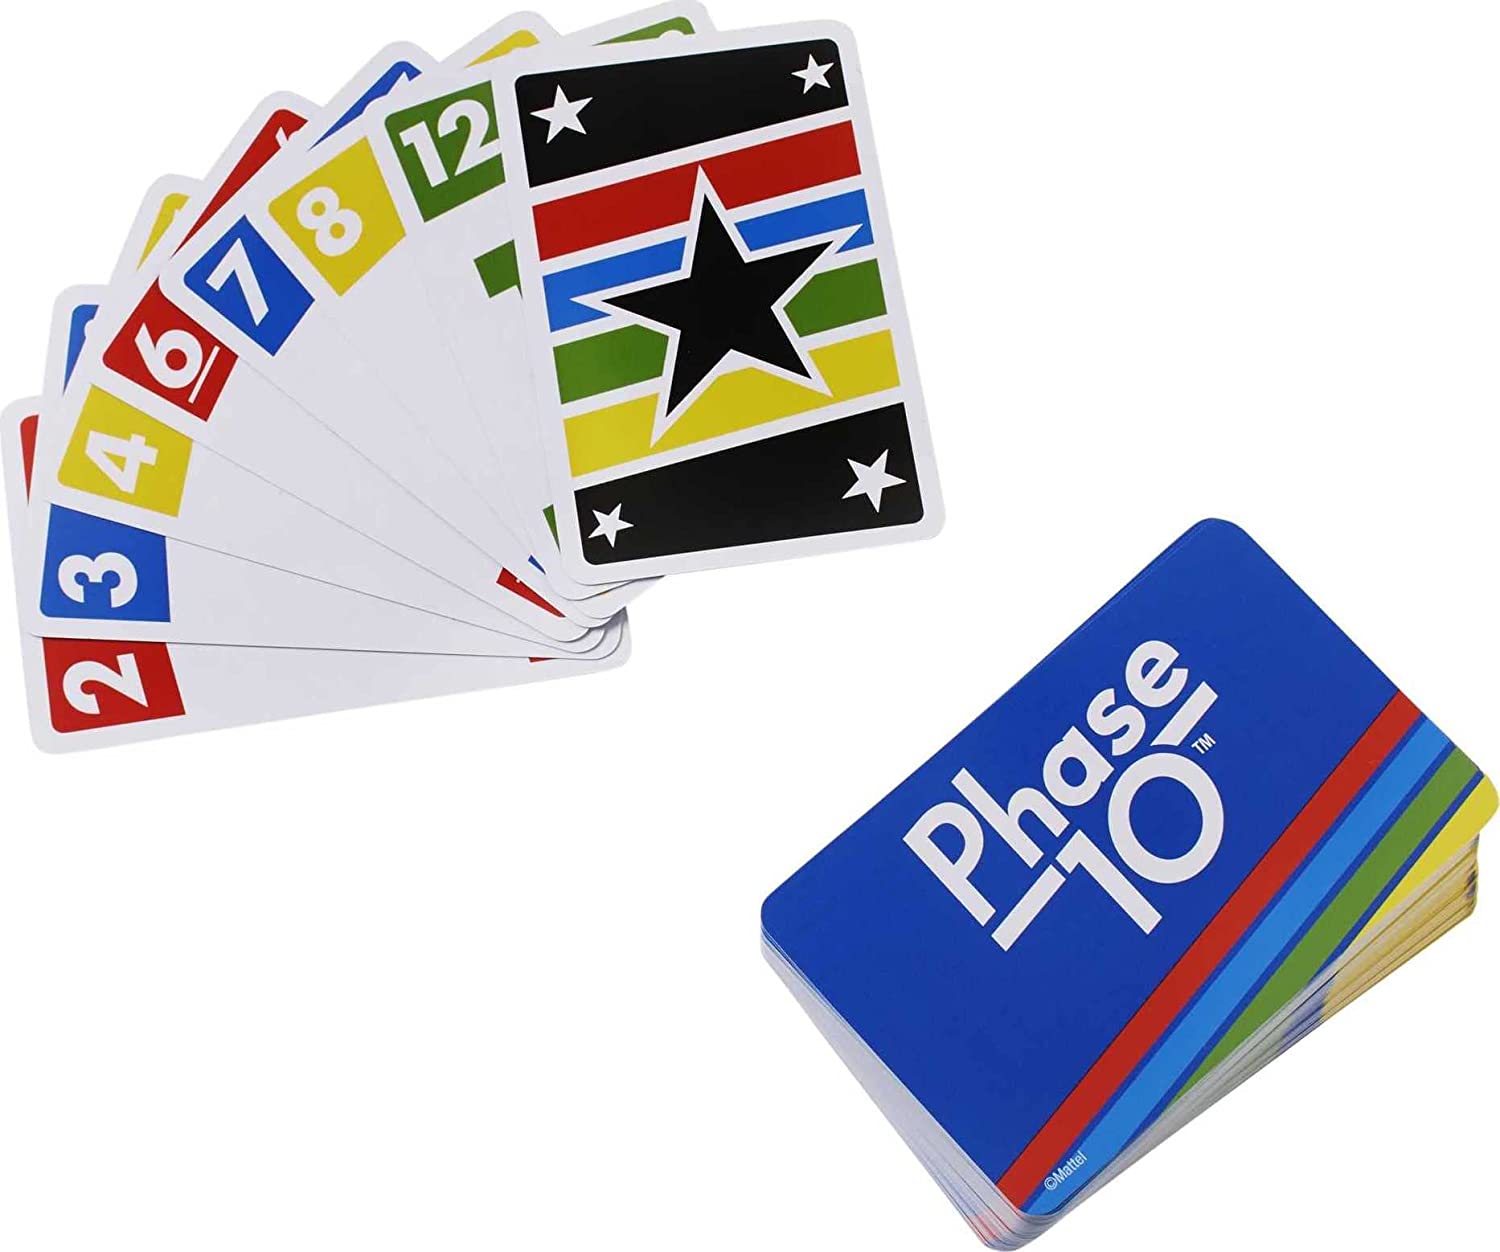 Phase 10 Card Game for 2-6 Players Ages 7 and Up